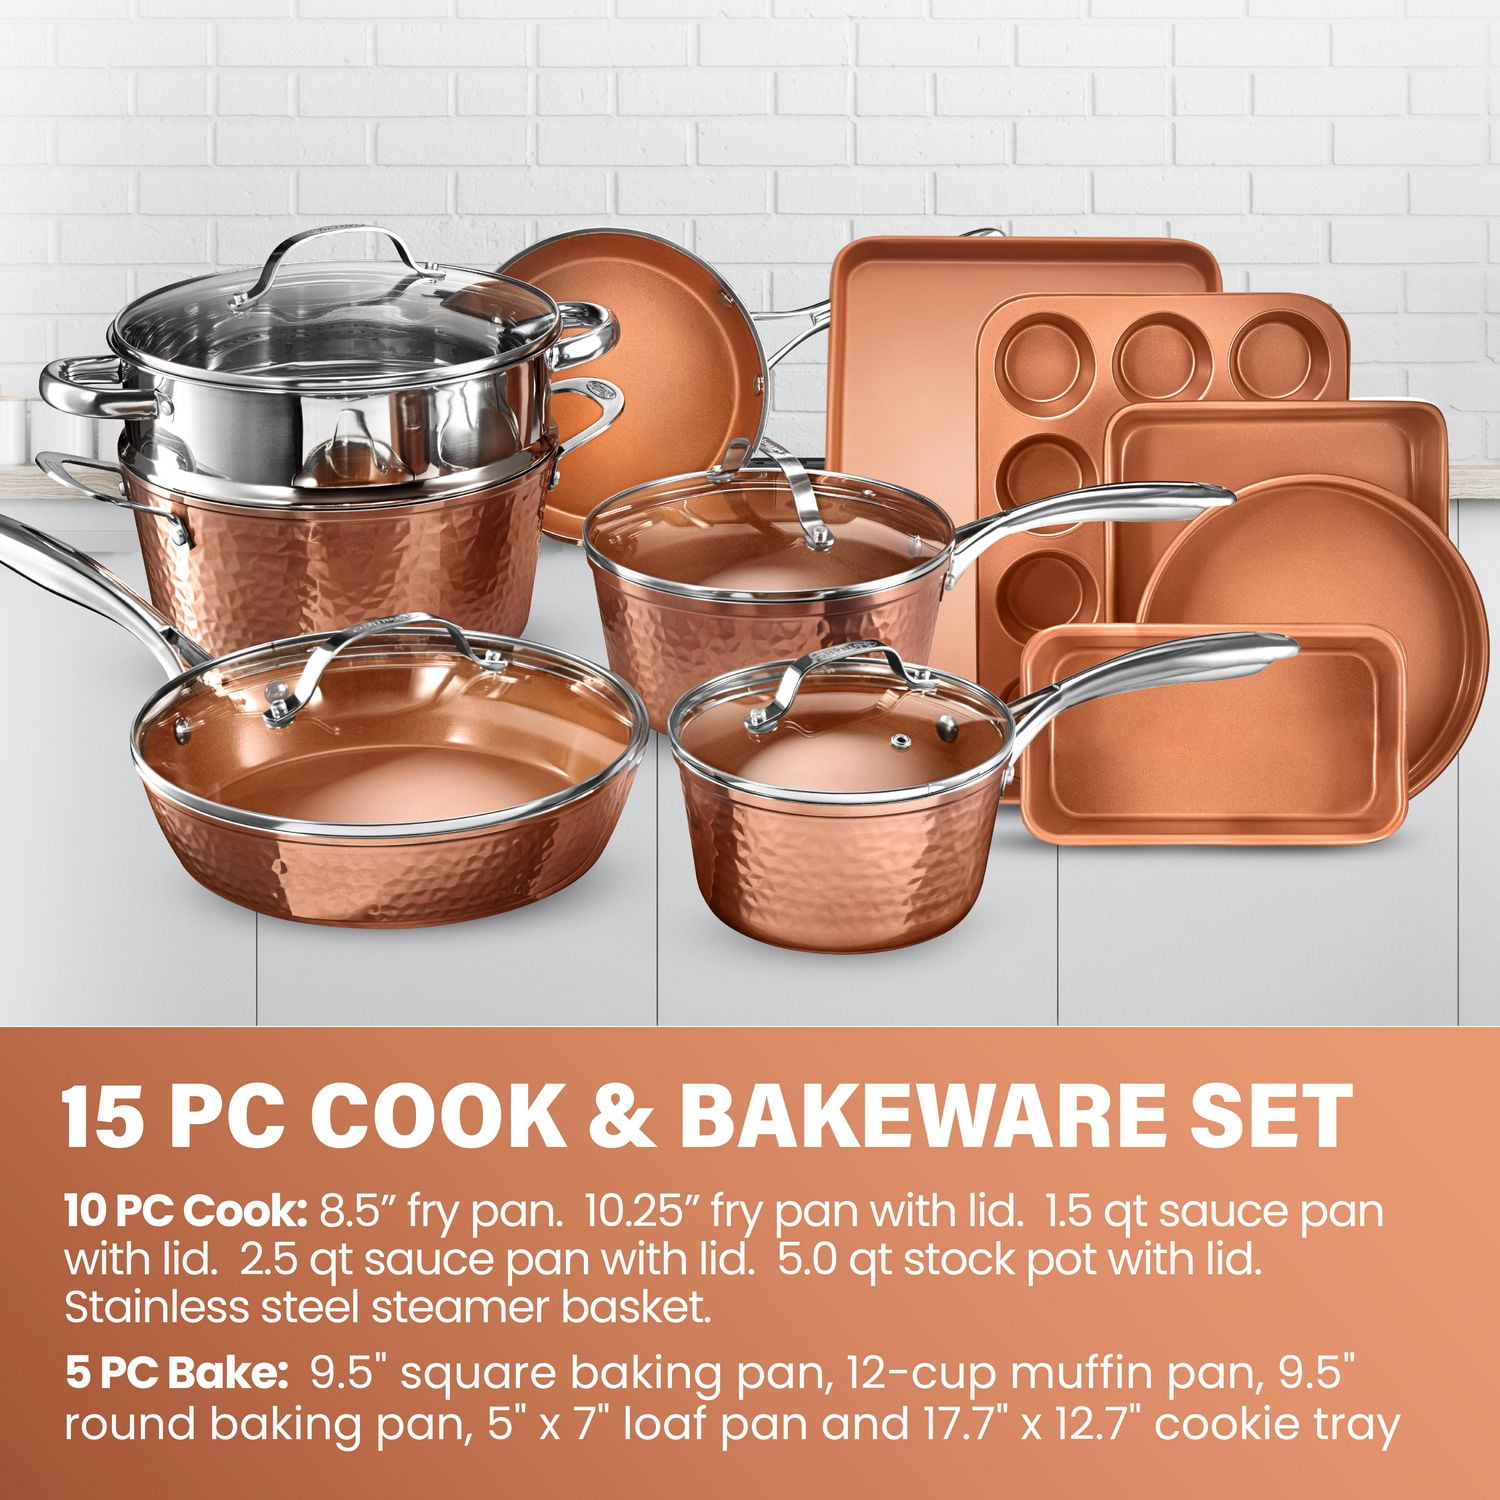 Gotham Steel Hammered Copper Collection – 15 Piece Premium Cookware &  Bakeware Set with Nonstick Coating, Aluminum Composition– Includes Fry  Pans, Stock Pots, Bakeware Set & More, Dishwasher Safe 